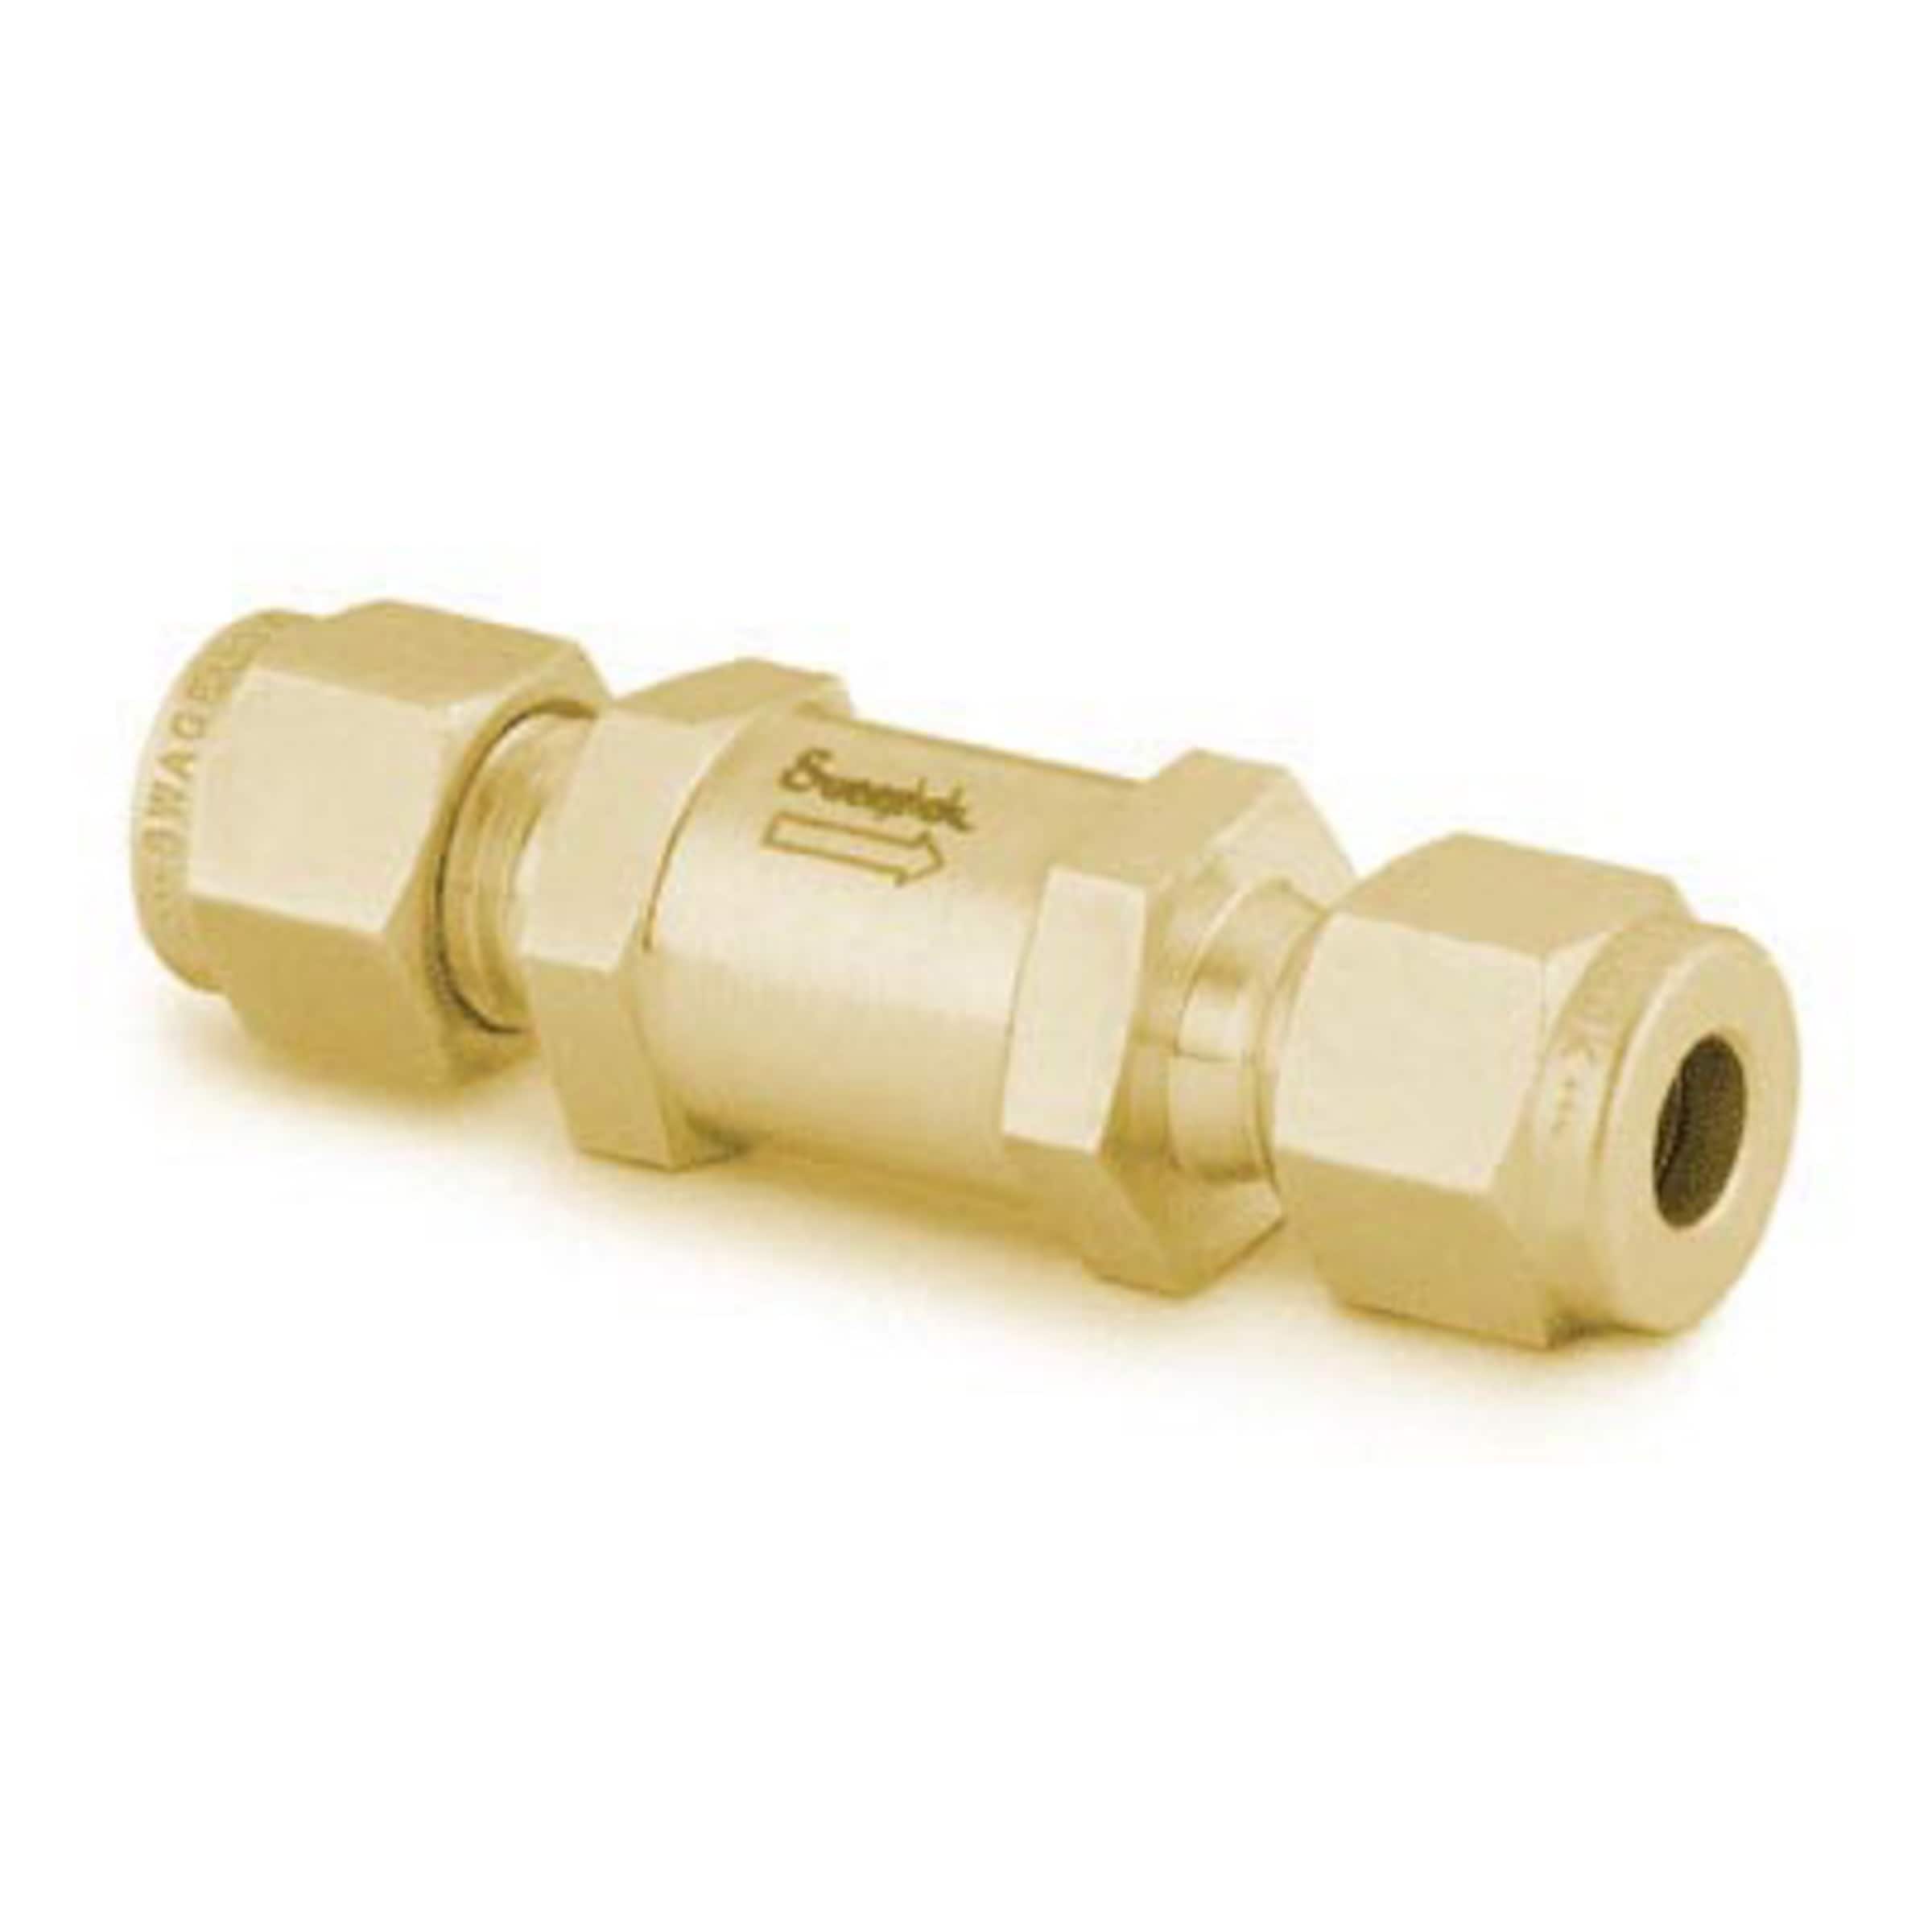 Brass Swagelok Tube Fitting, Male Connector, 3/8 Tube OD X, 49% OFF